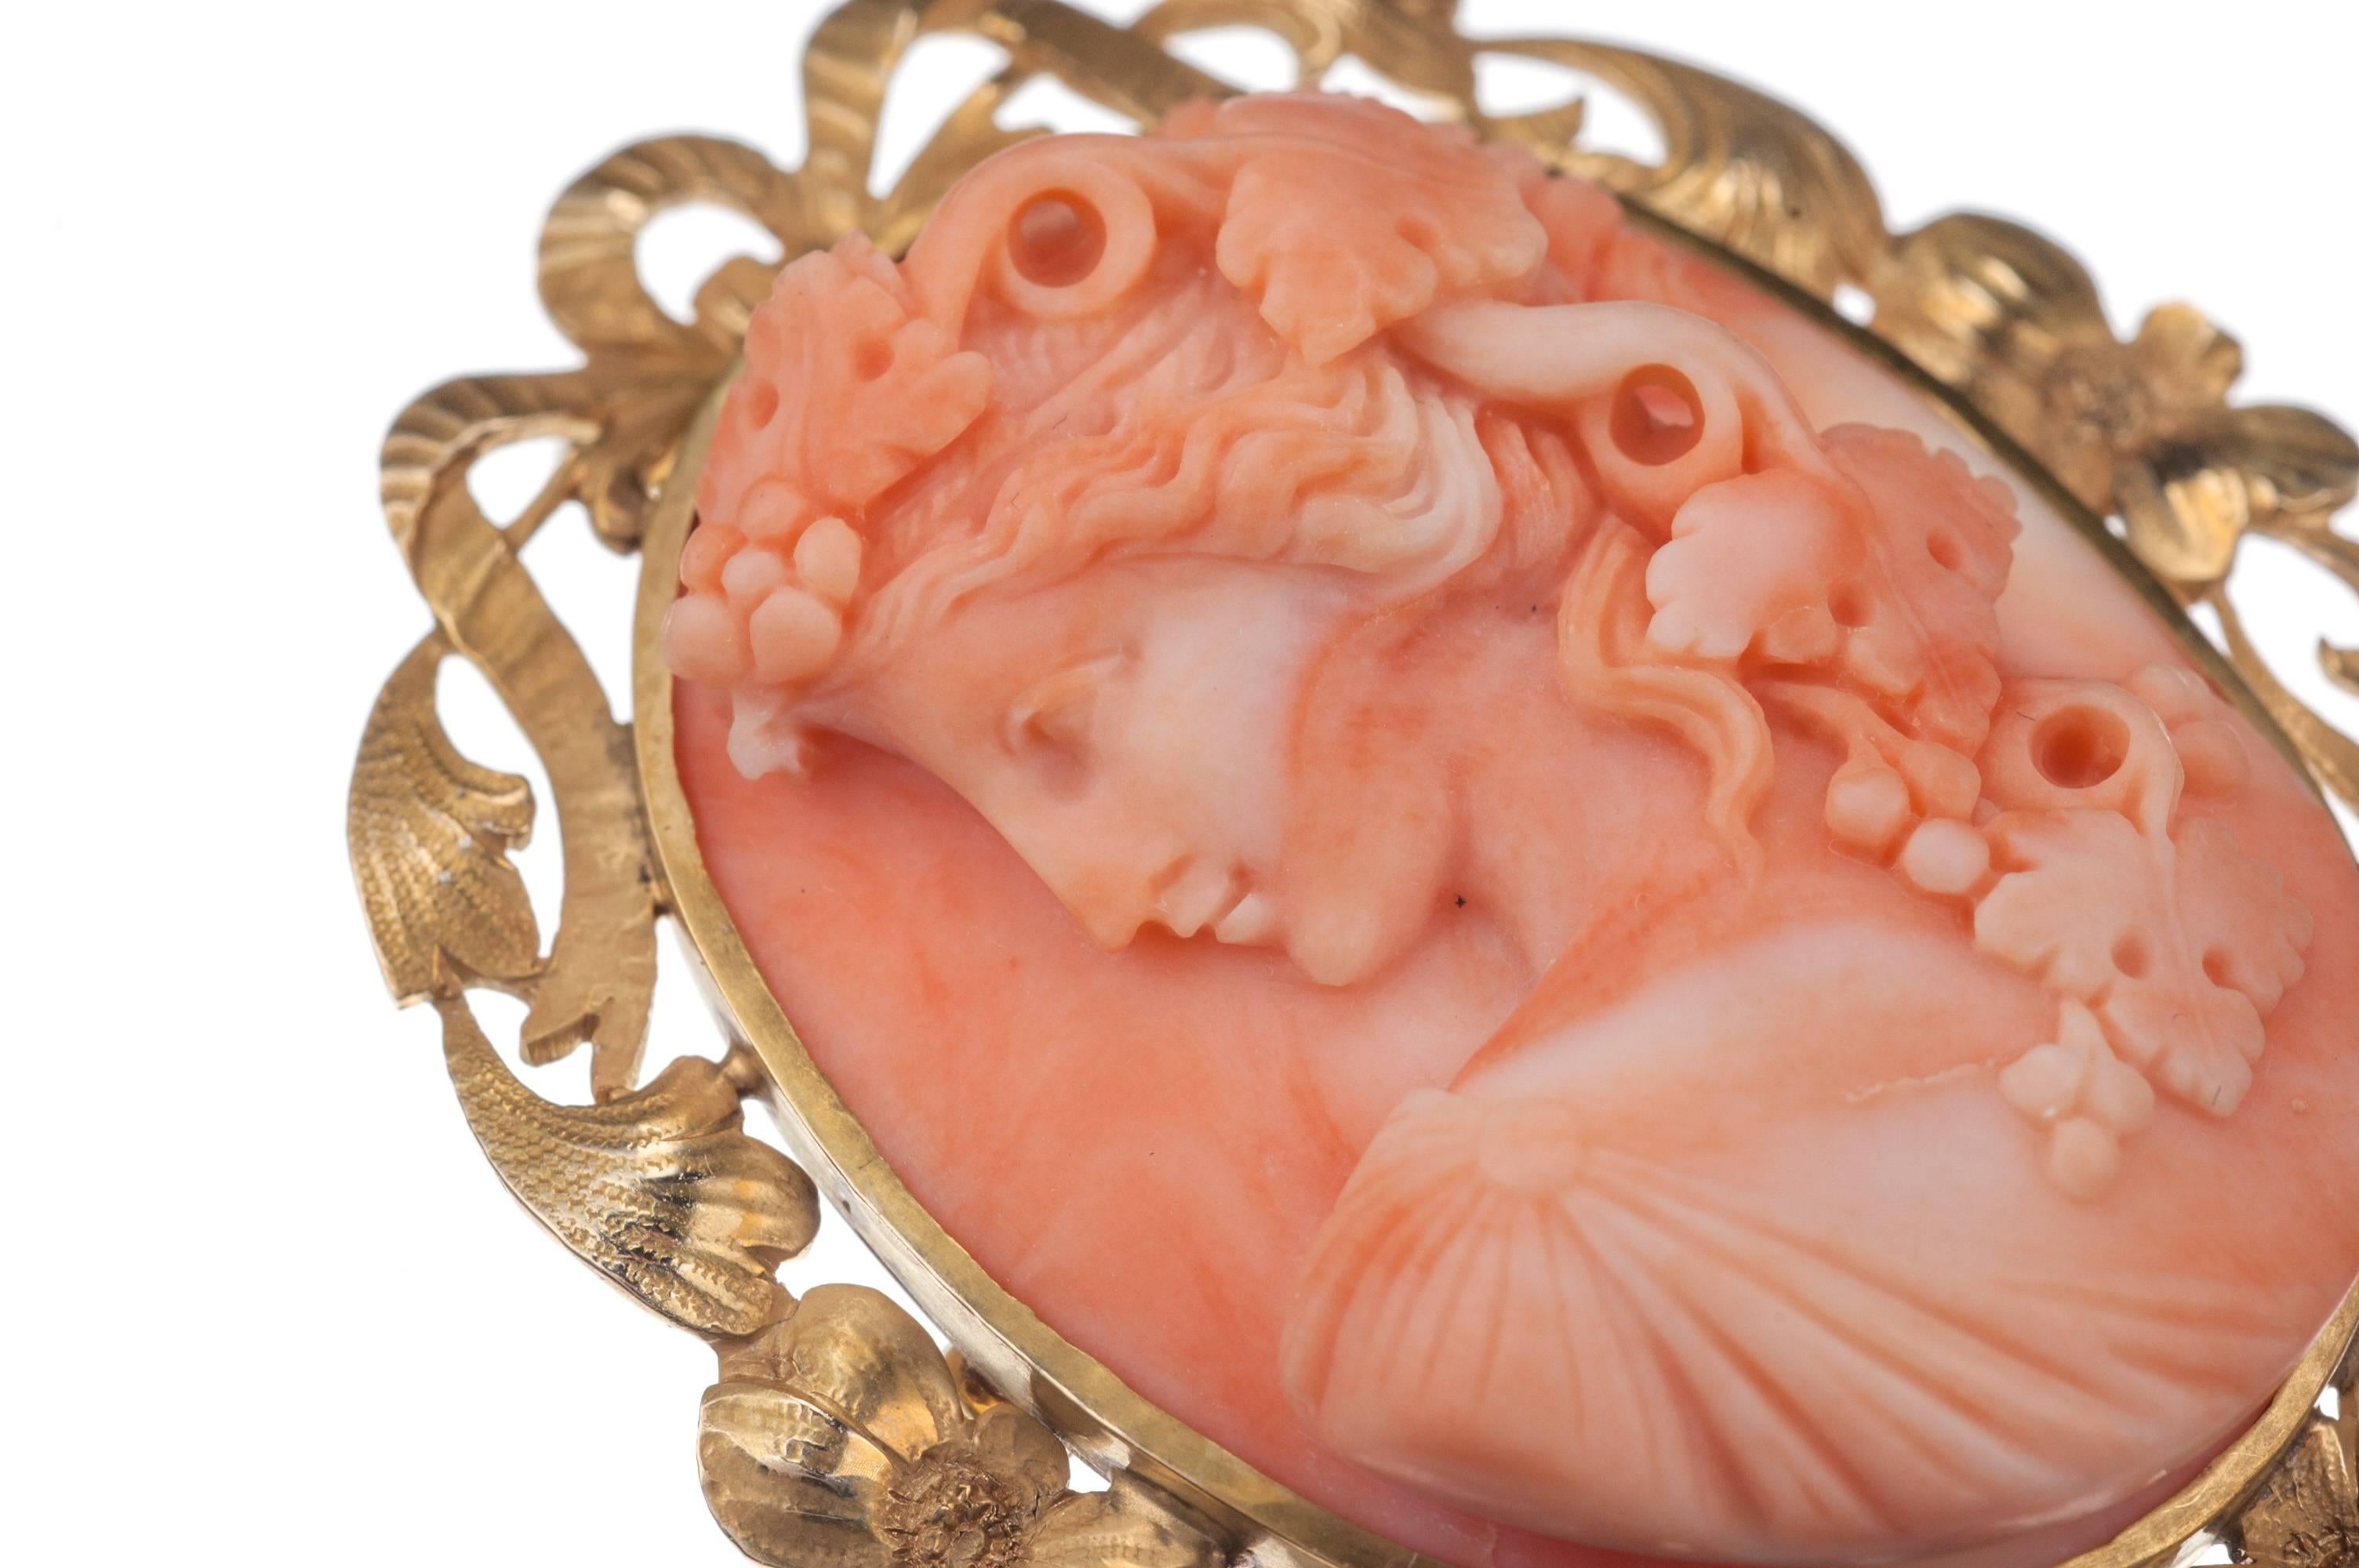 Sculpted from creamy pink-orange coral, a cameo brooch in 14-karat yellow gold. Fitted with a swivel bail that discreetly folds away, the brooch can strung along a necklace or simple ribbon to be worn as a pendant. Measures approx. 1.75” long.